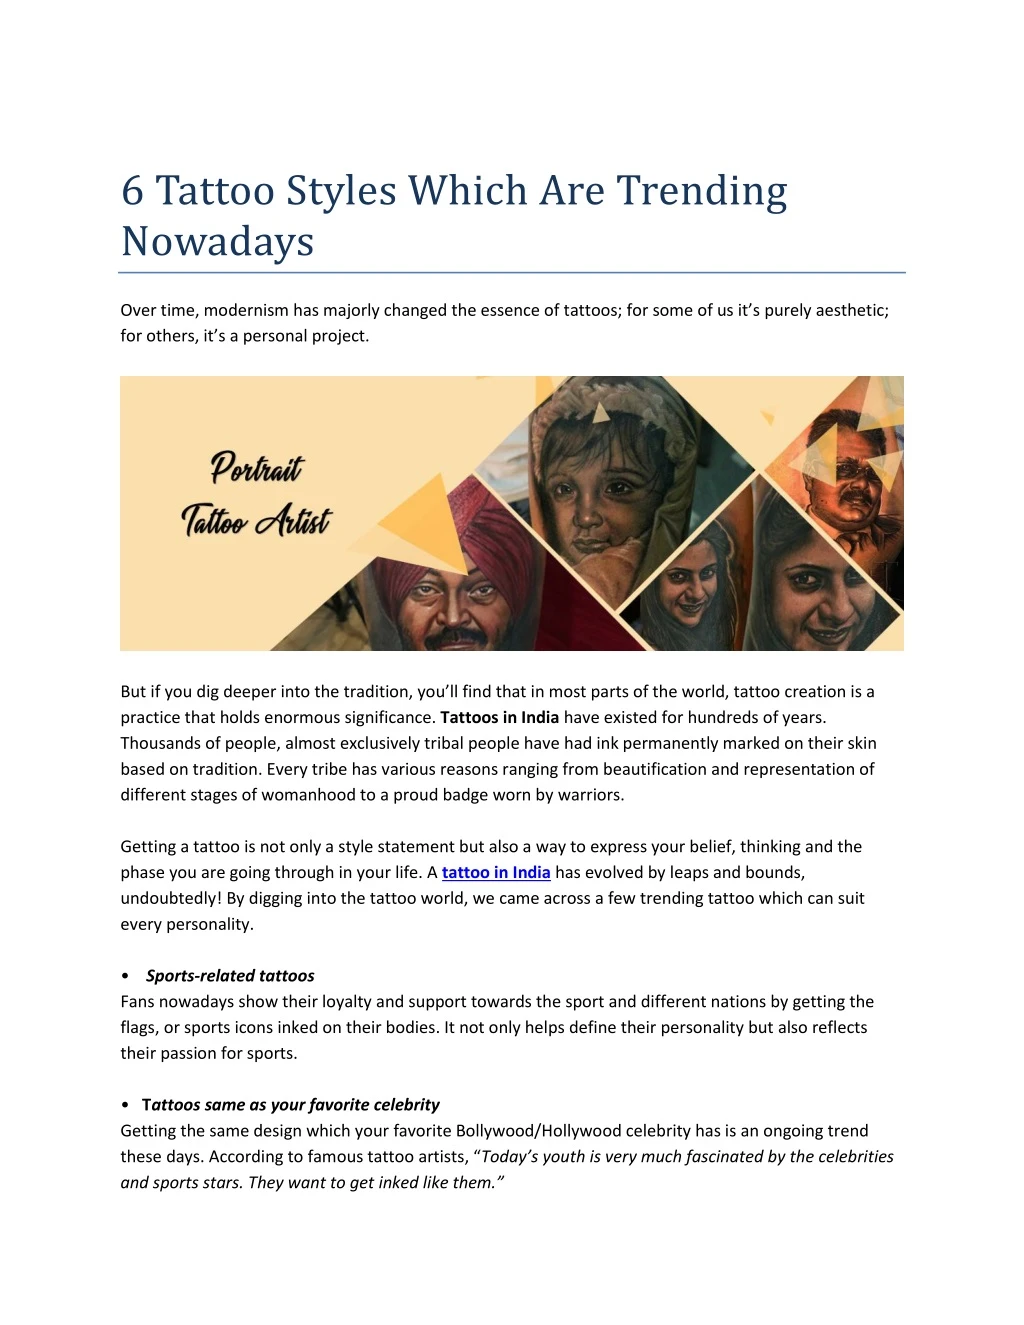 6 tattoo styles which are trending nowadays